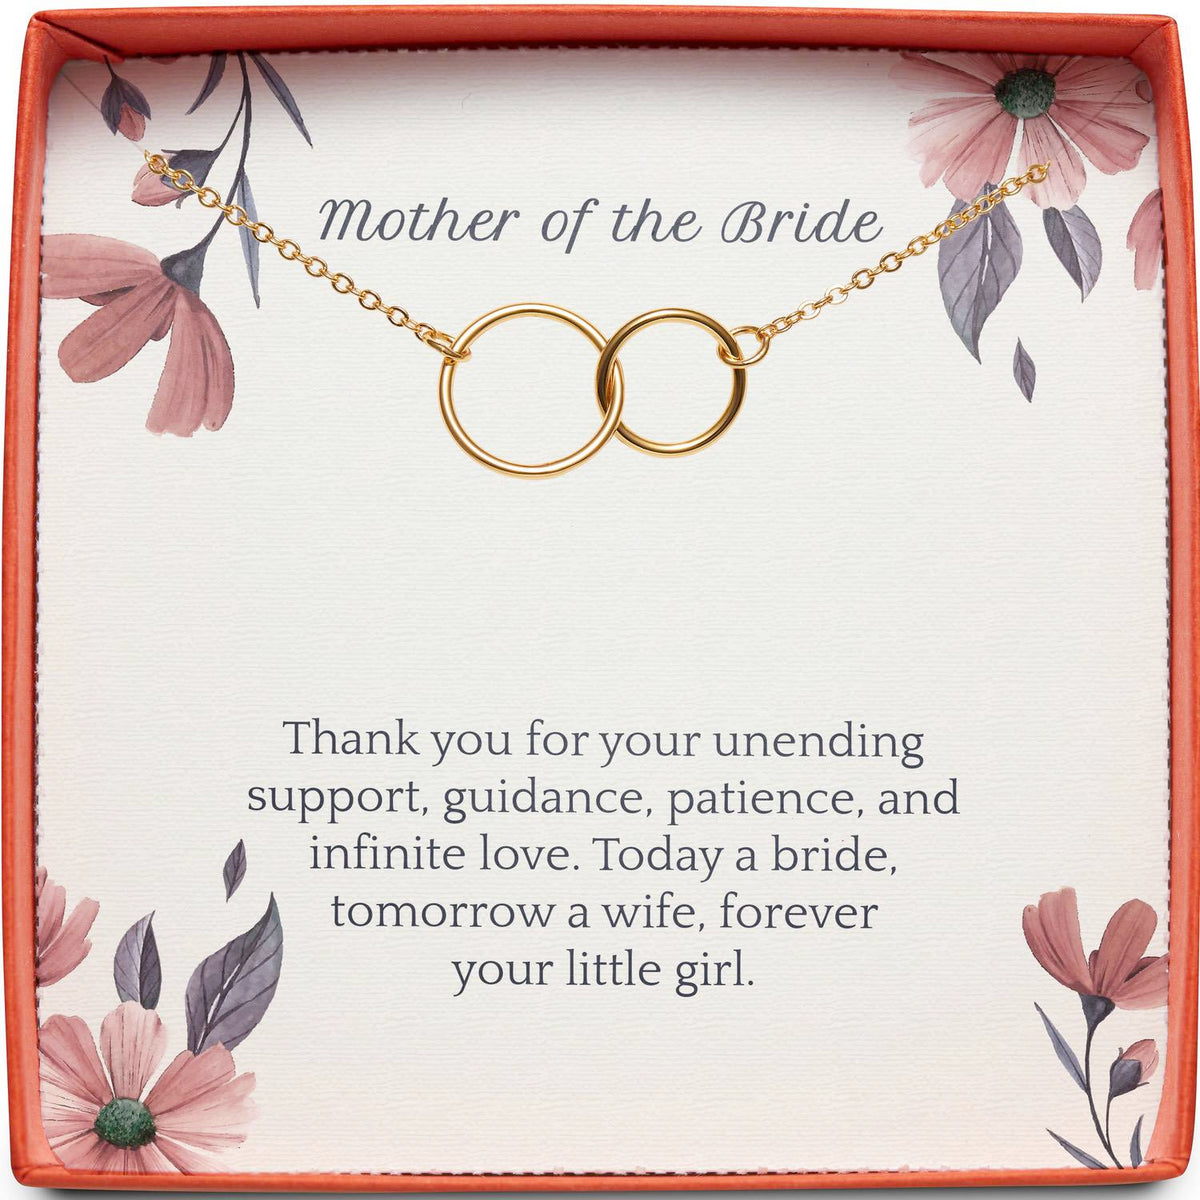 Mother of the Bride (From Daughter) | Forever Your Little Girl | Interlocking Circles